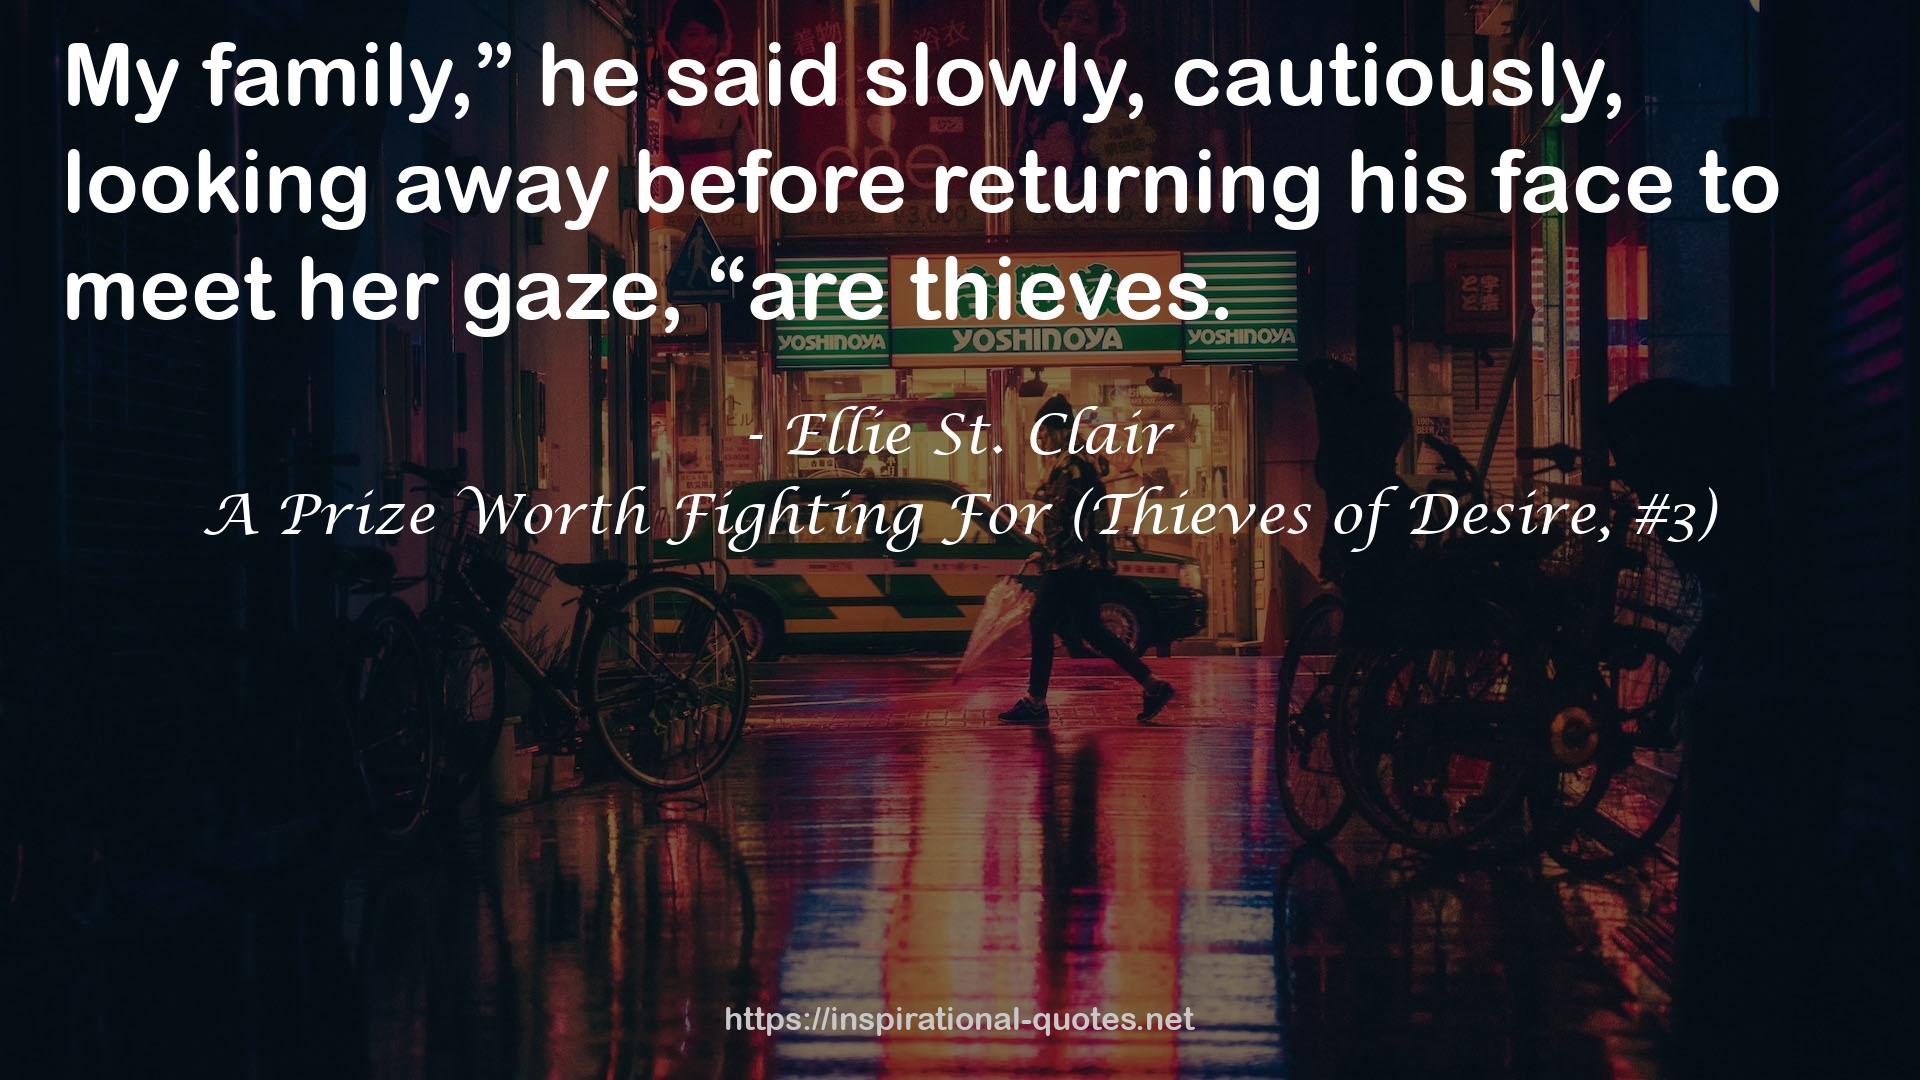 A Prize Worth Fighting For (Thieves of Desire, #3) QUOTES